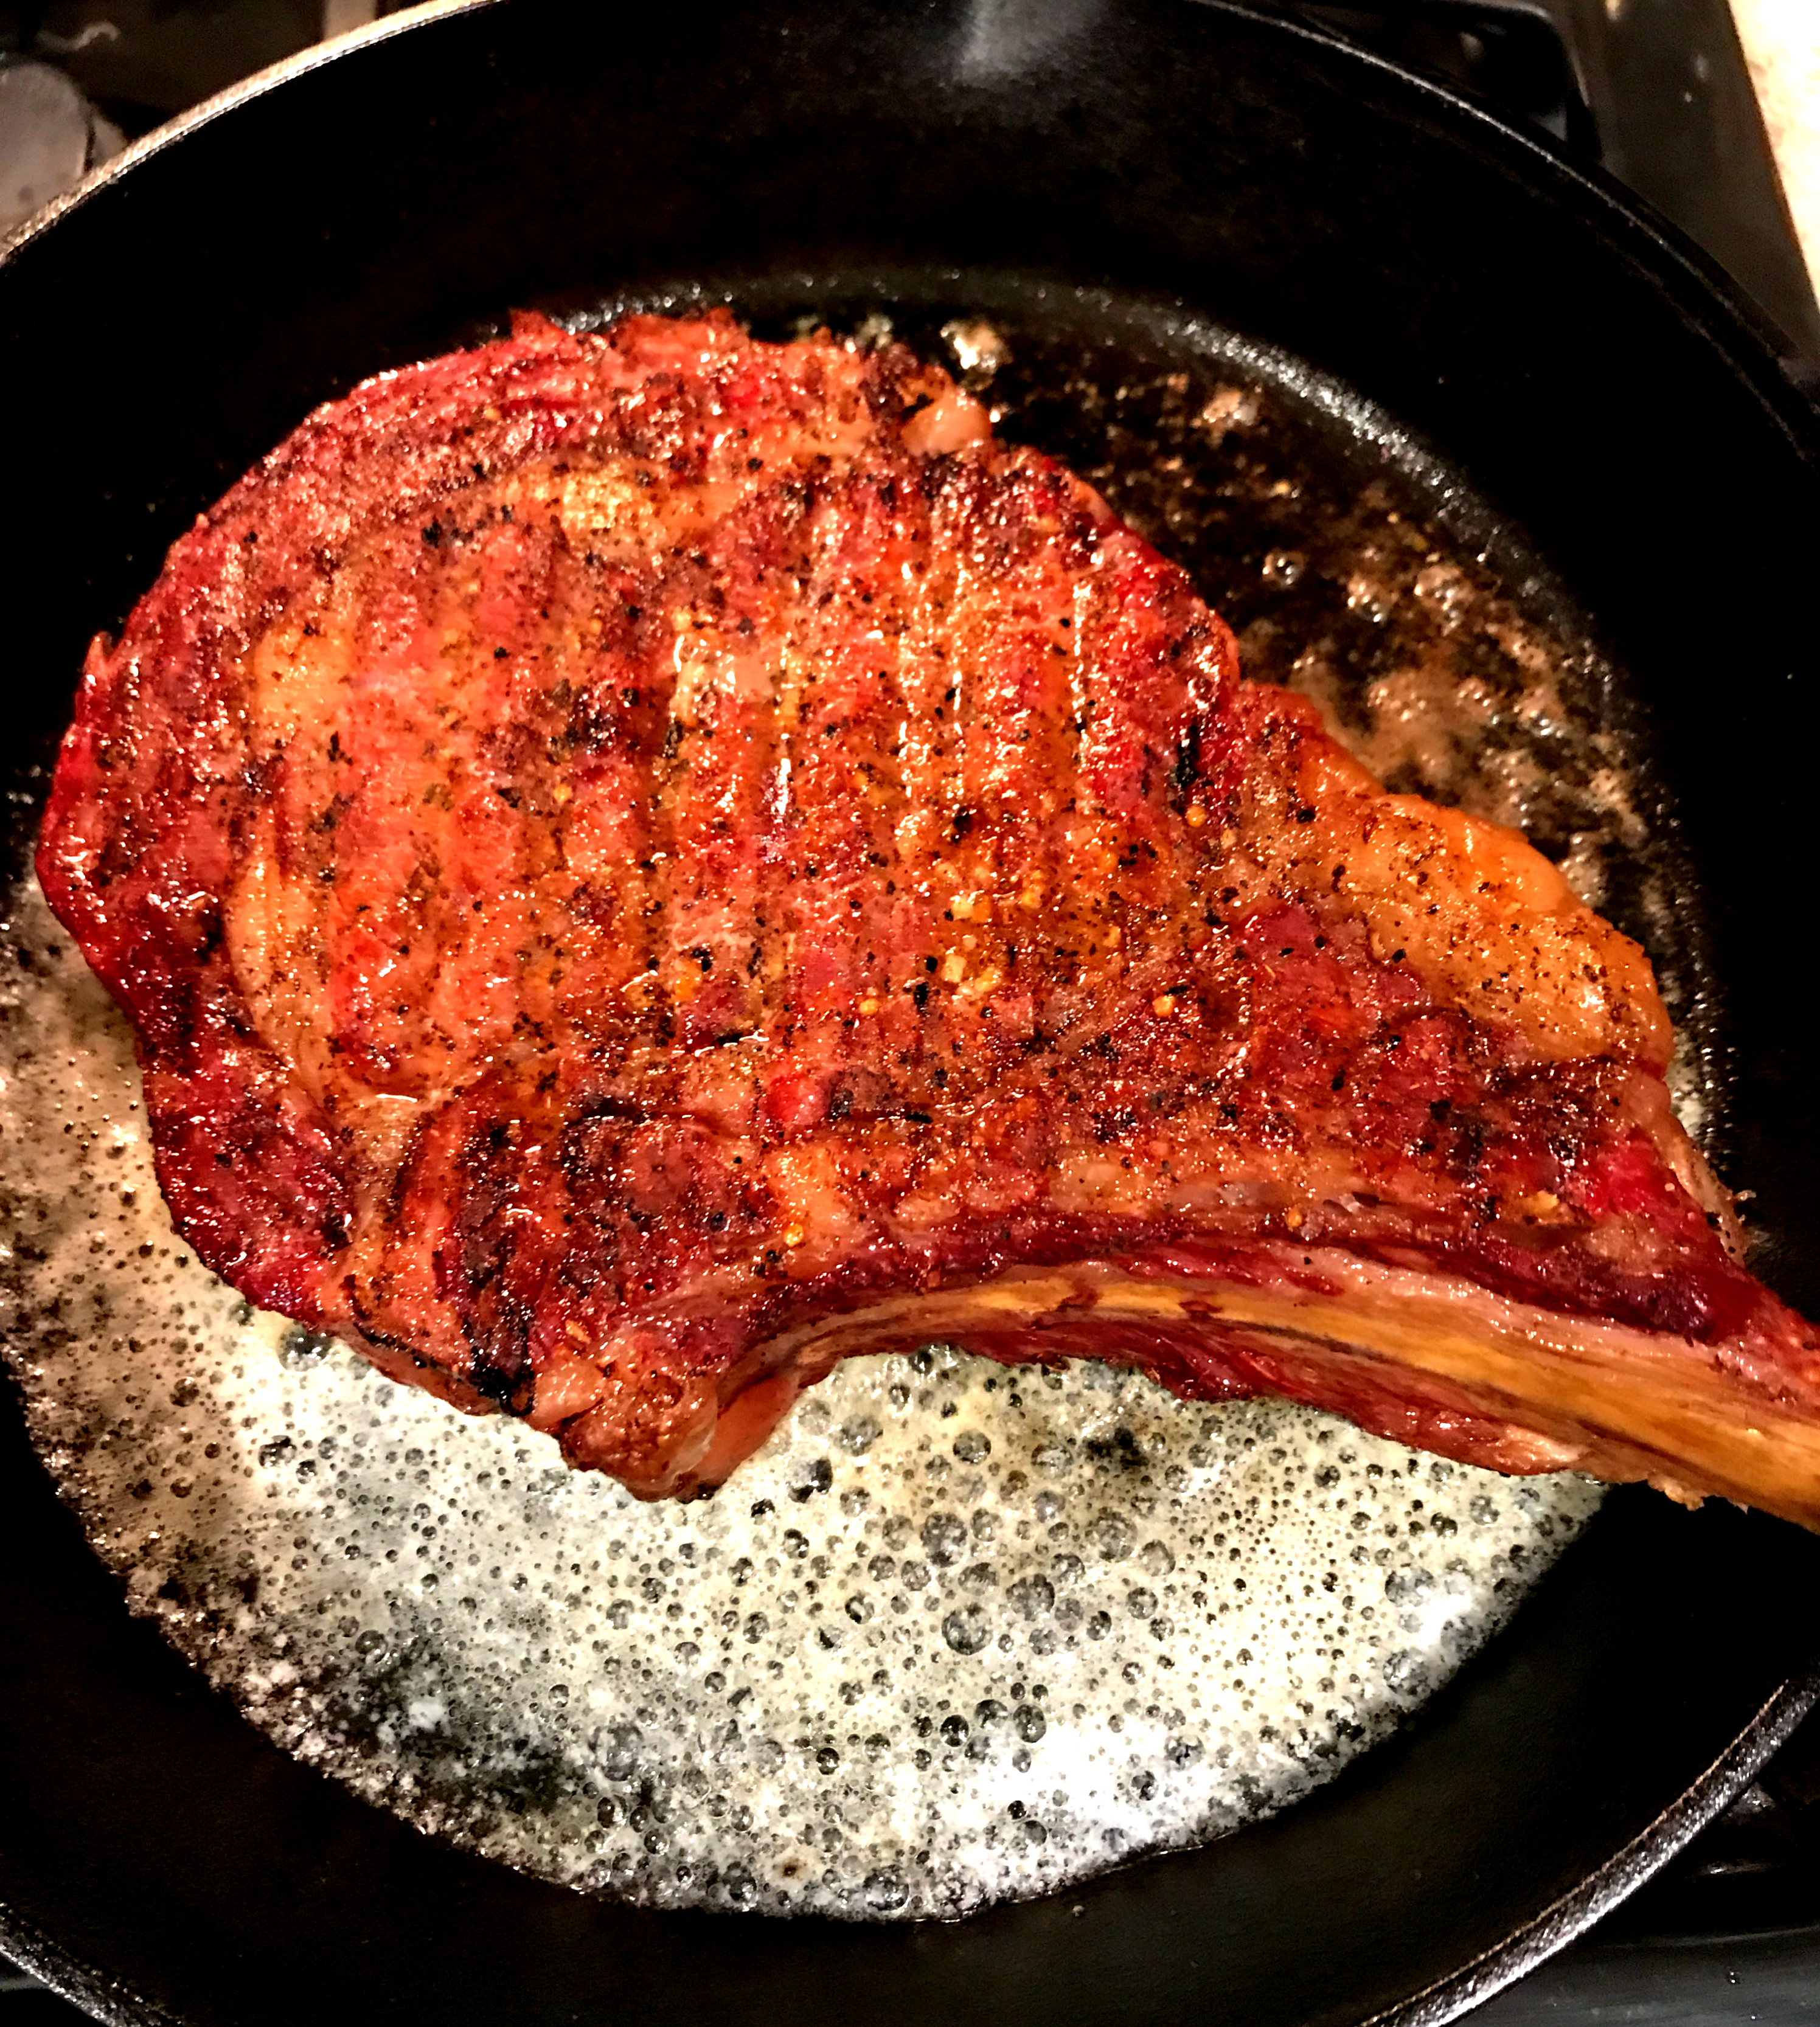 Searing in the cast iron. 